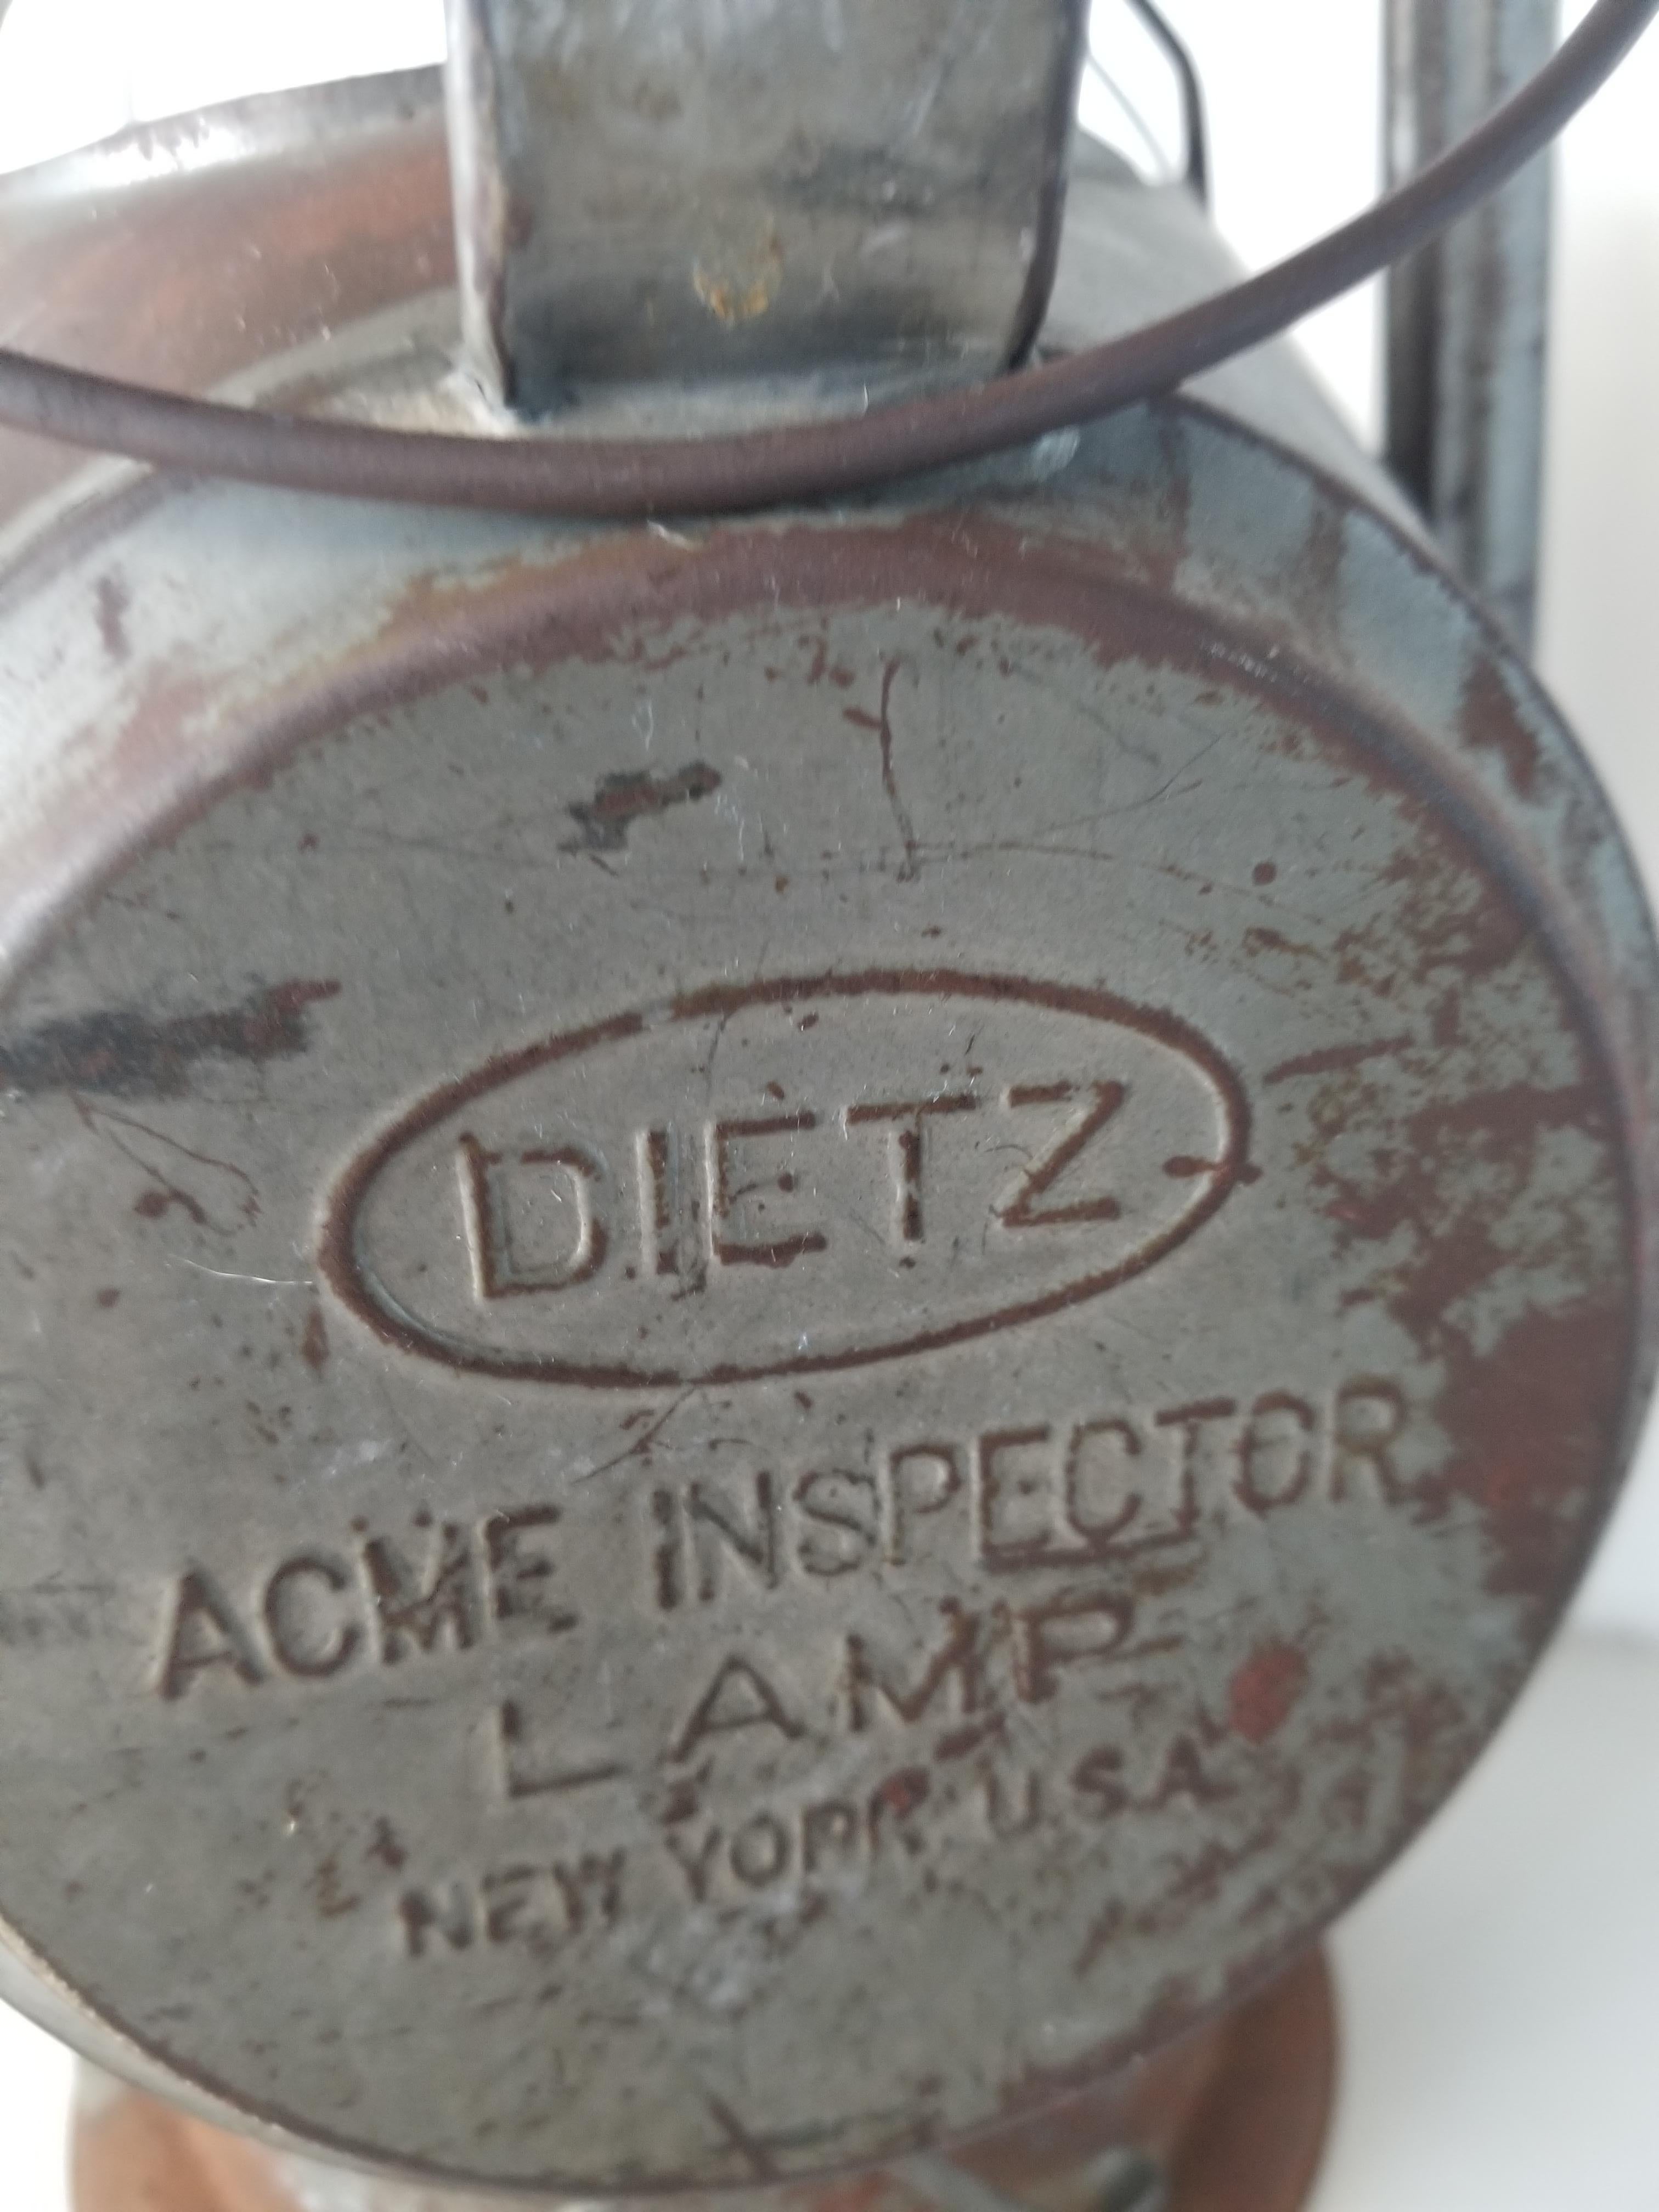 Antique Dietz Acme Large Inspector Lamp Two Railroad Lanterns New York 1900s 5